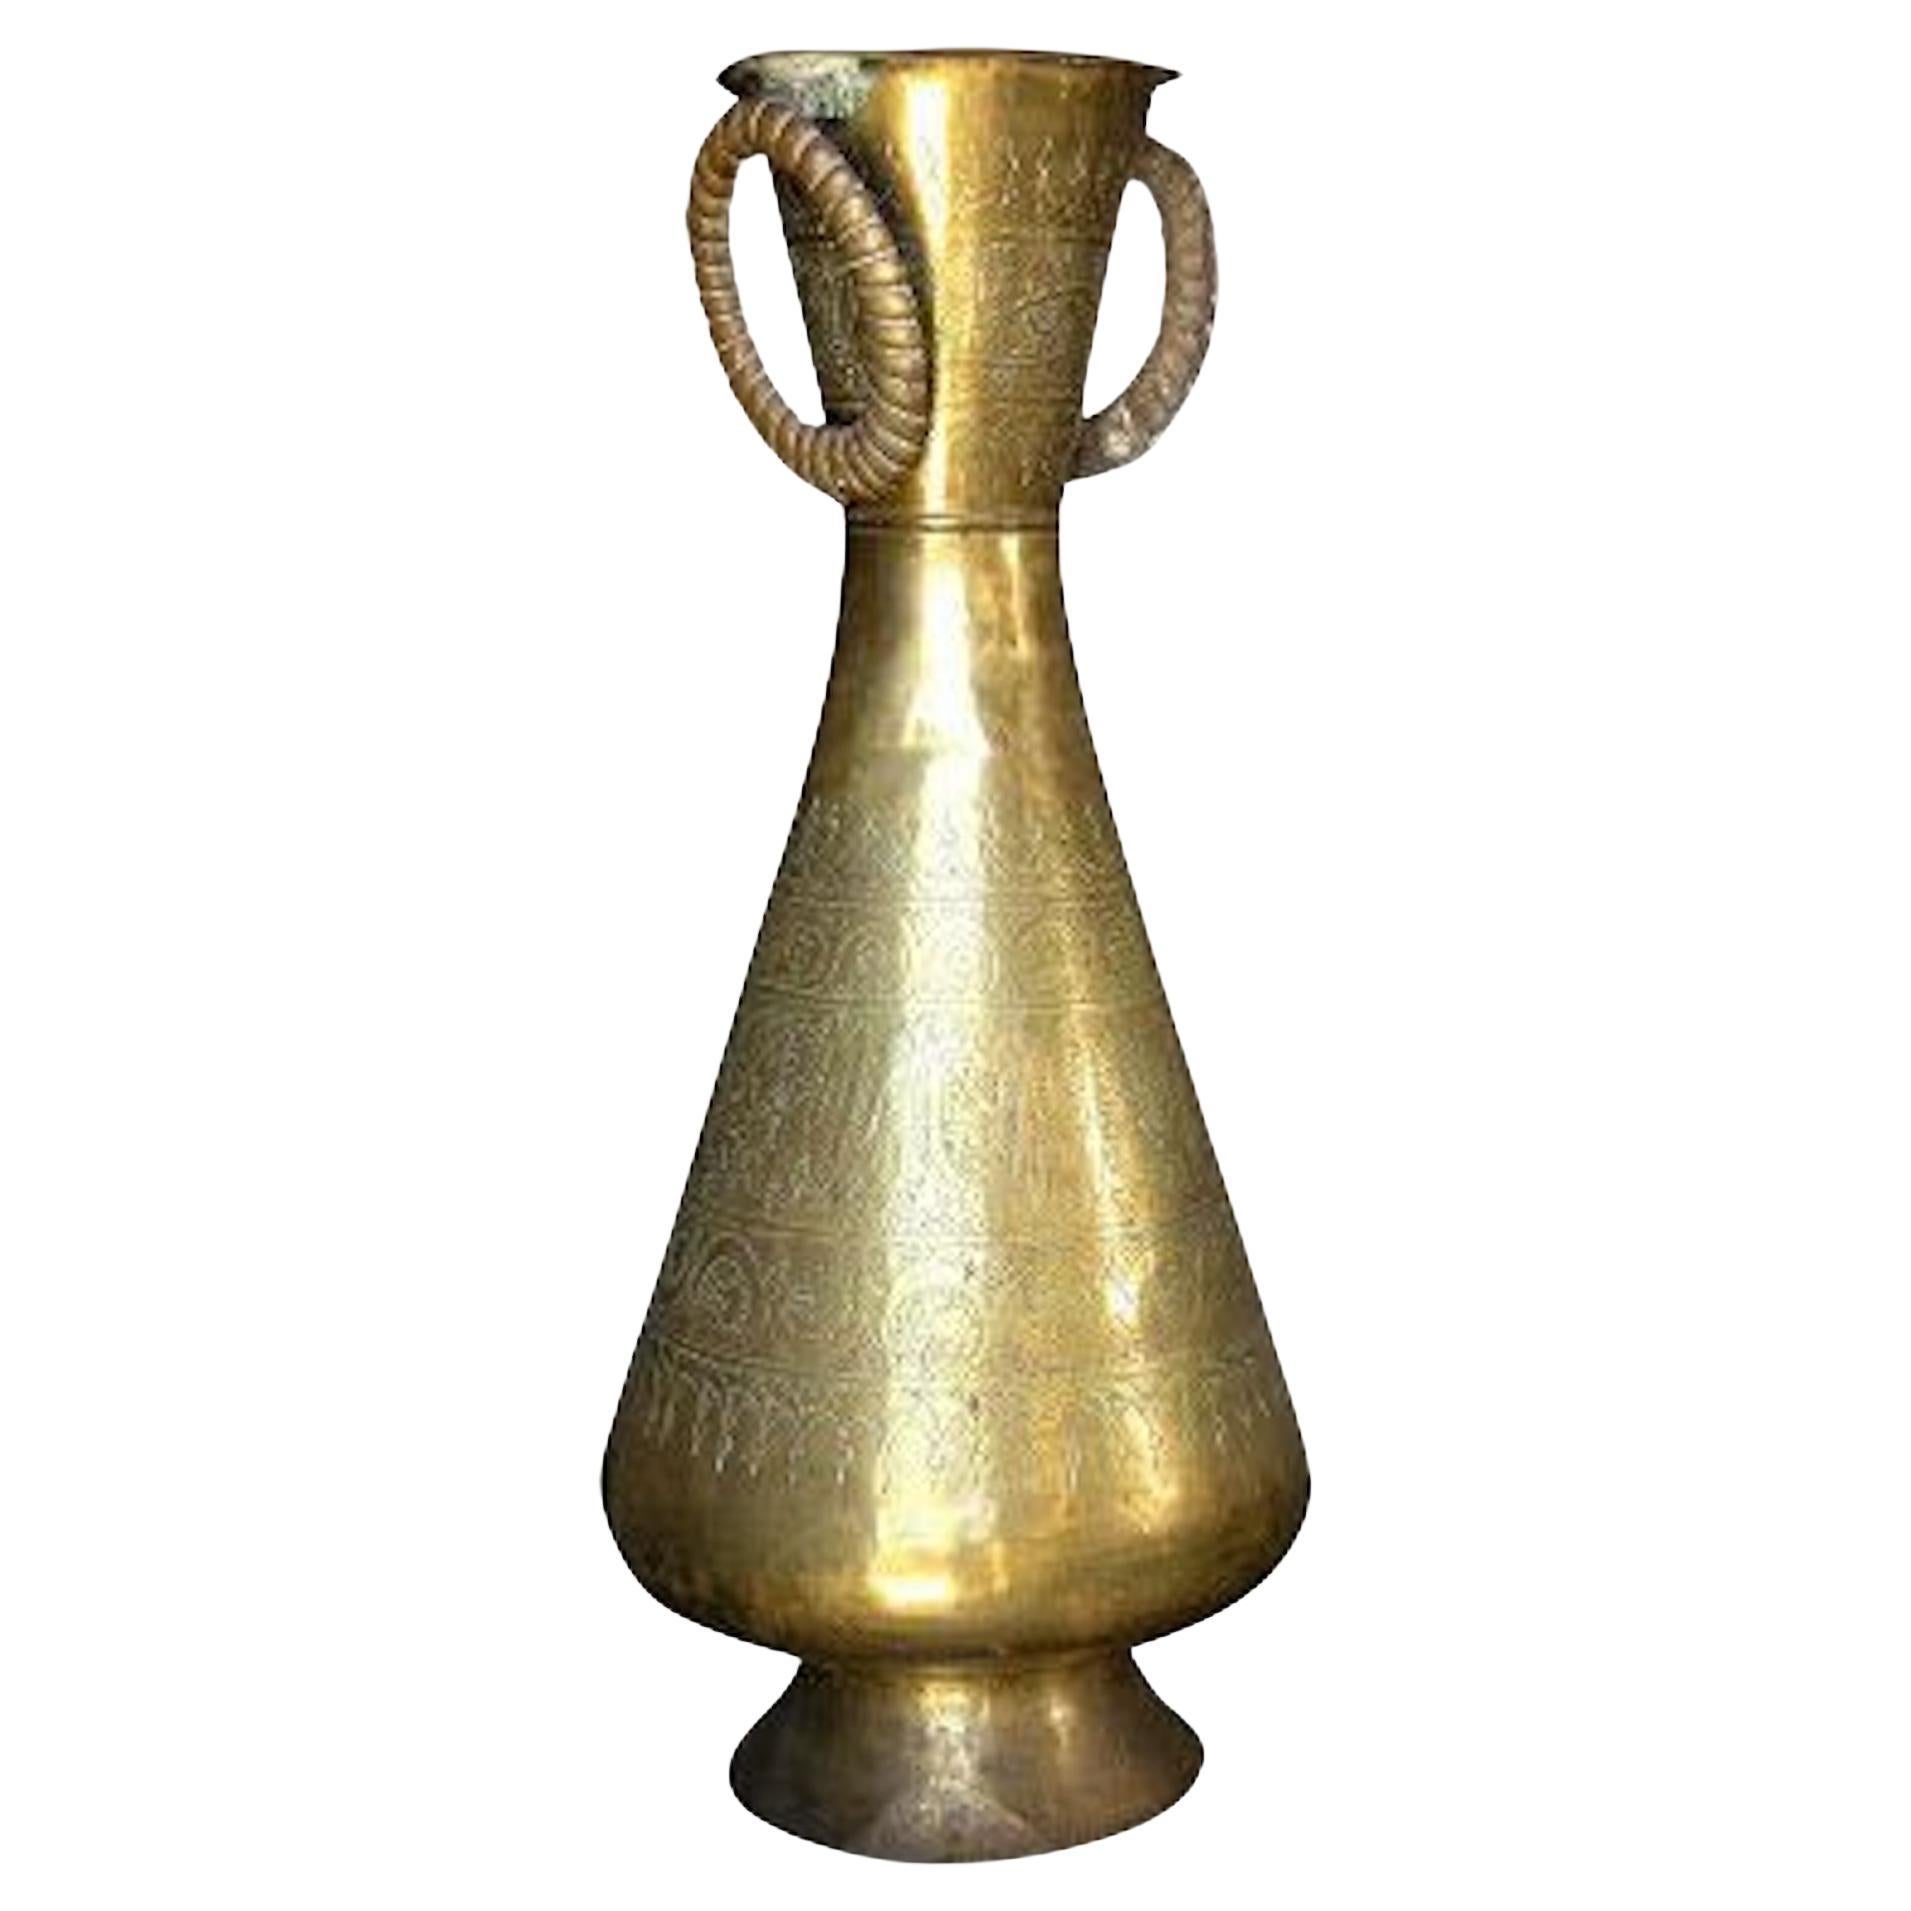 Arabian Middle Eastern Brass Islamic Art Vase Engraved With Arabic Calligraphy For Sale